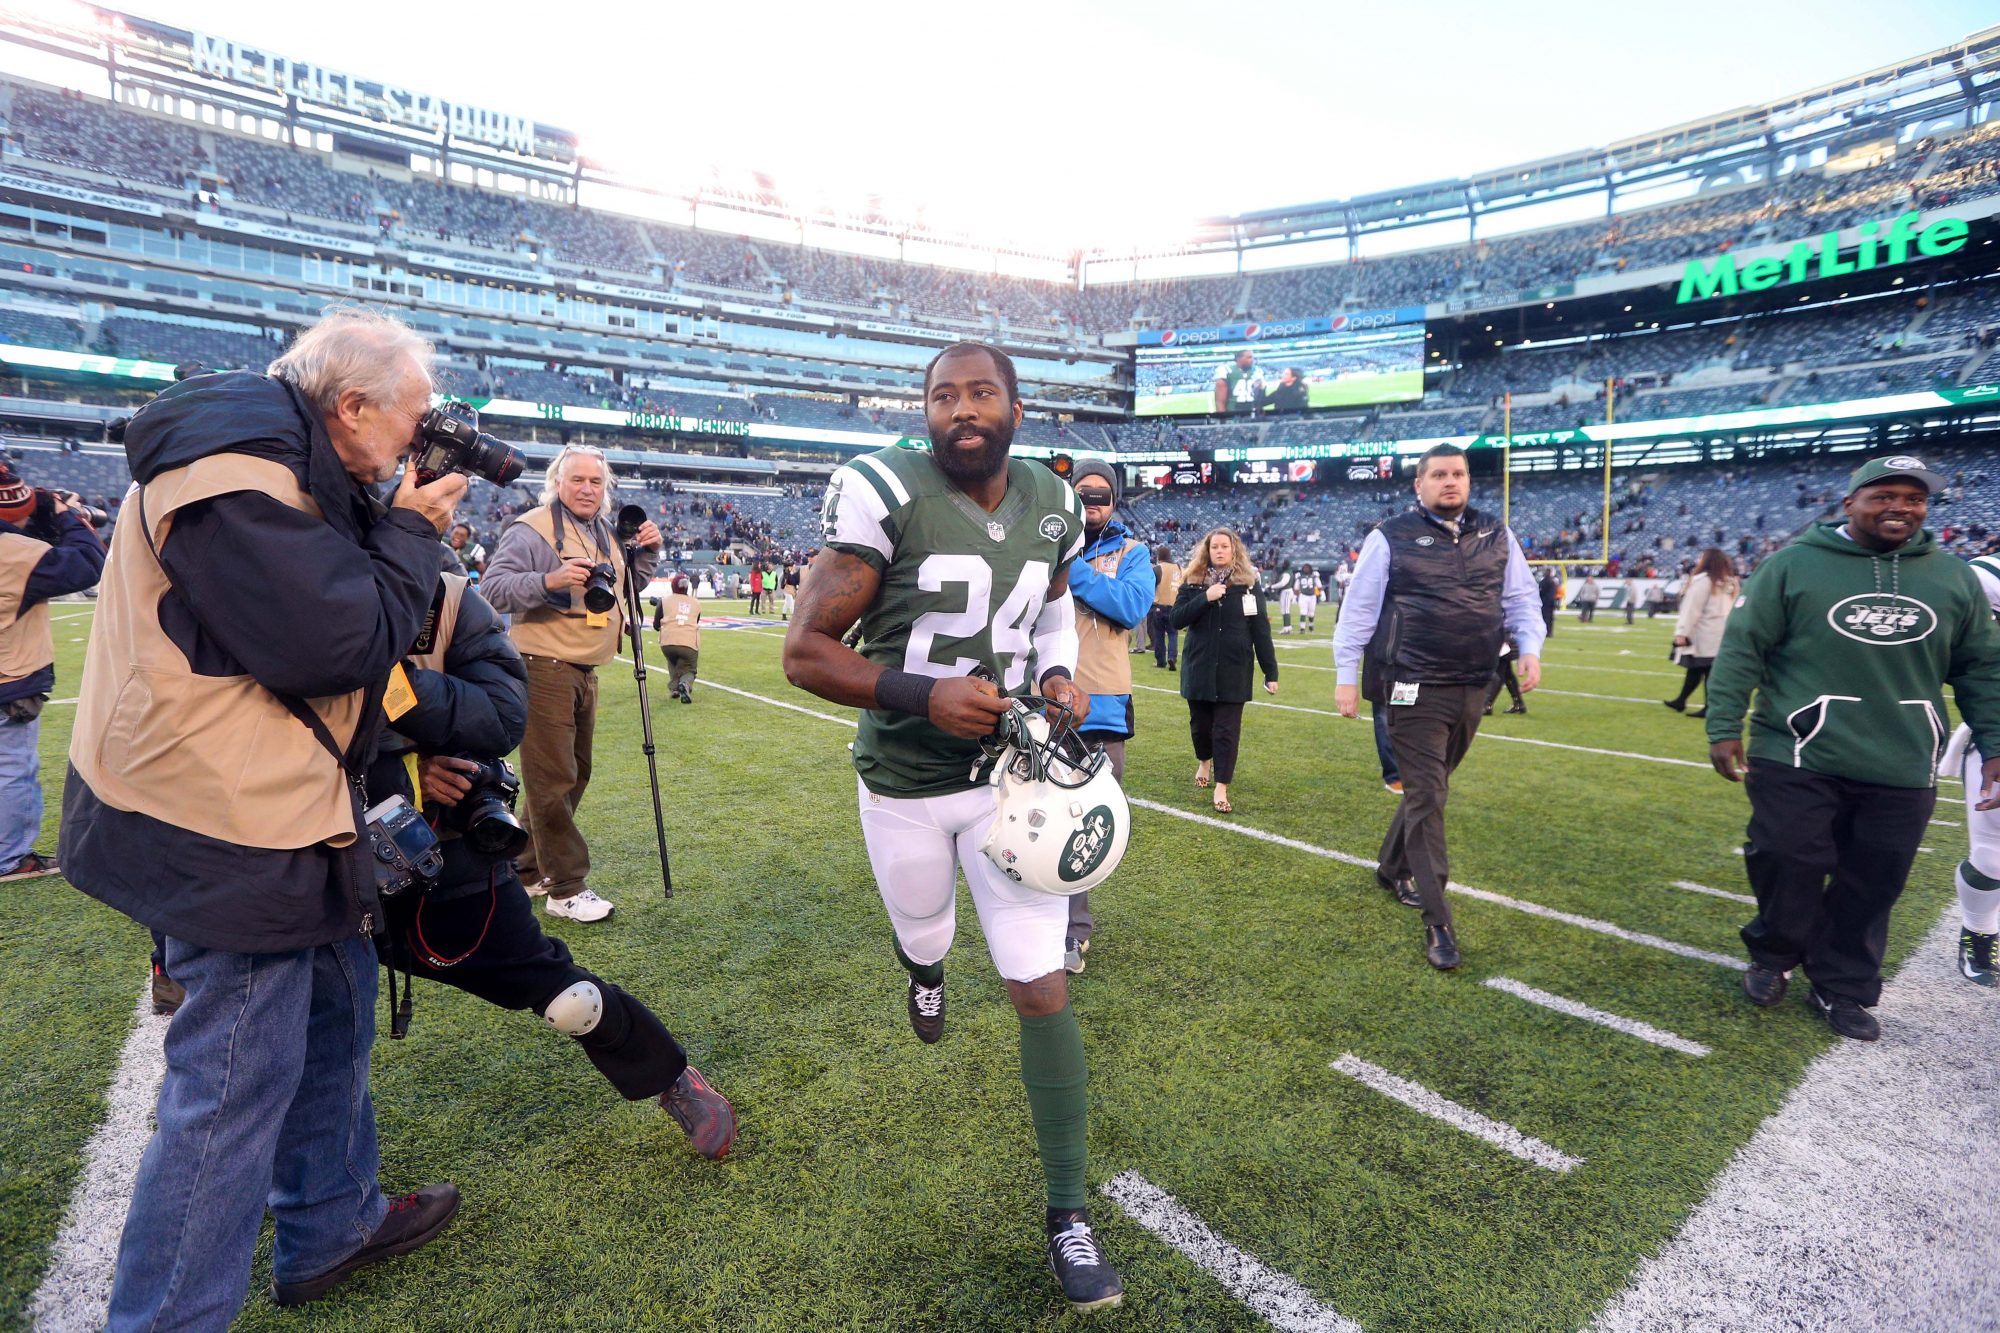 New York Jets: Darrelle Revis tampering case was far worse than